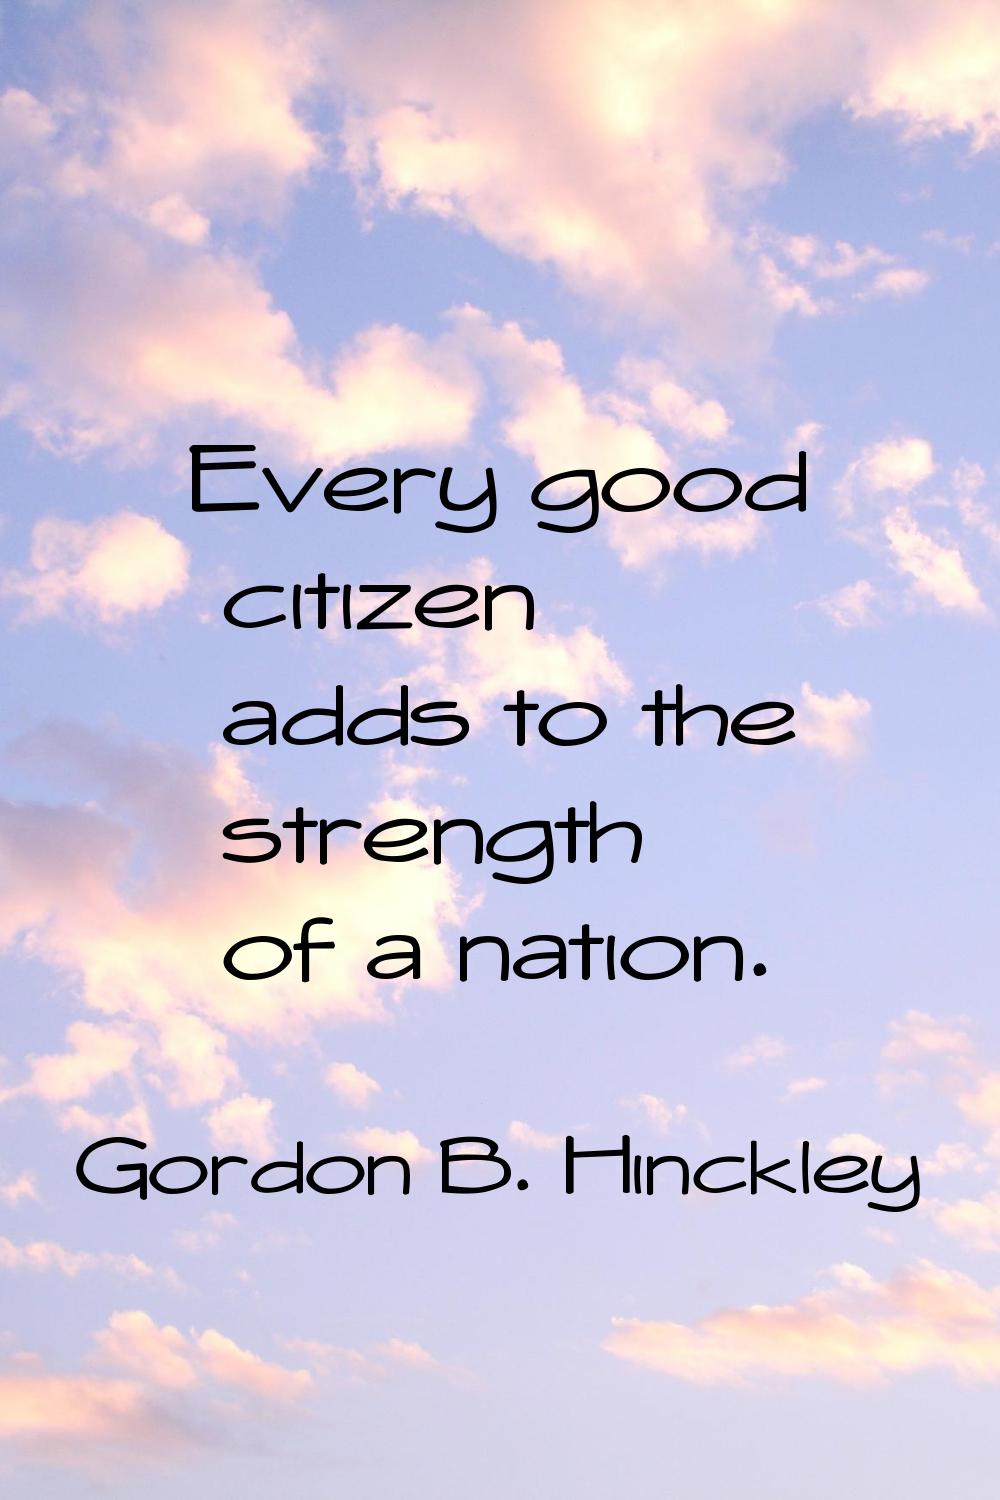 Every good citizen adds to the strength of a nation.